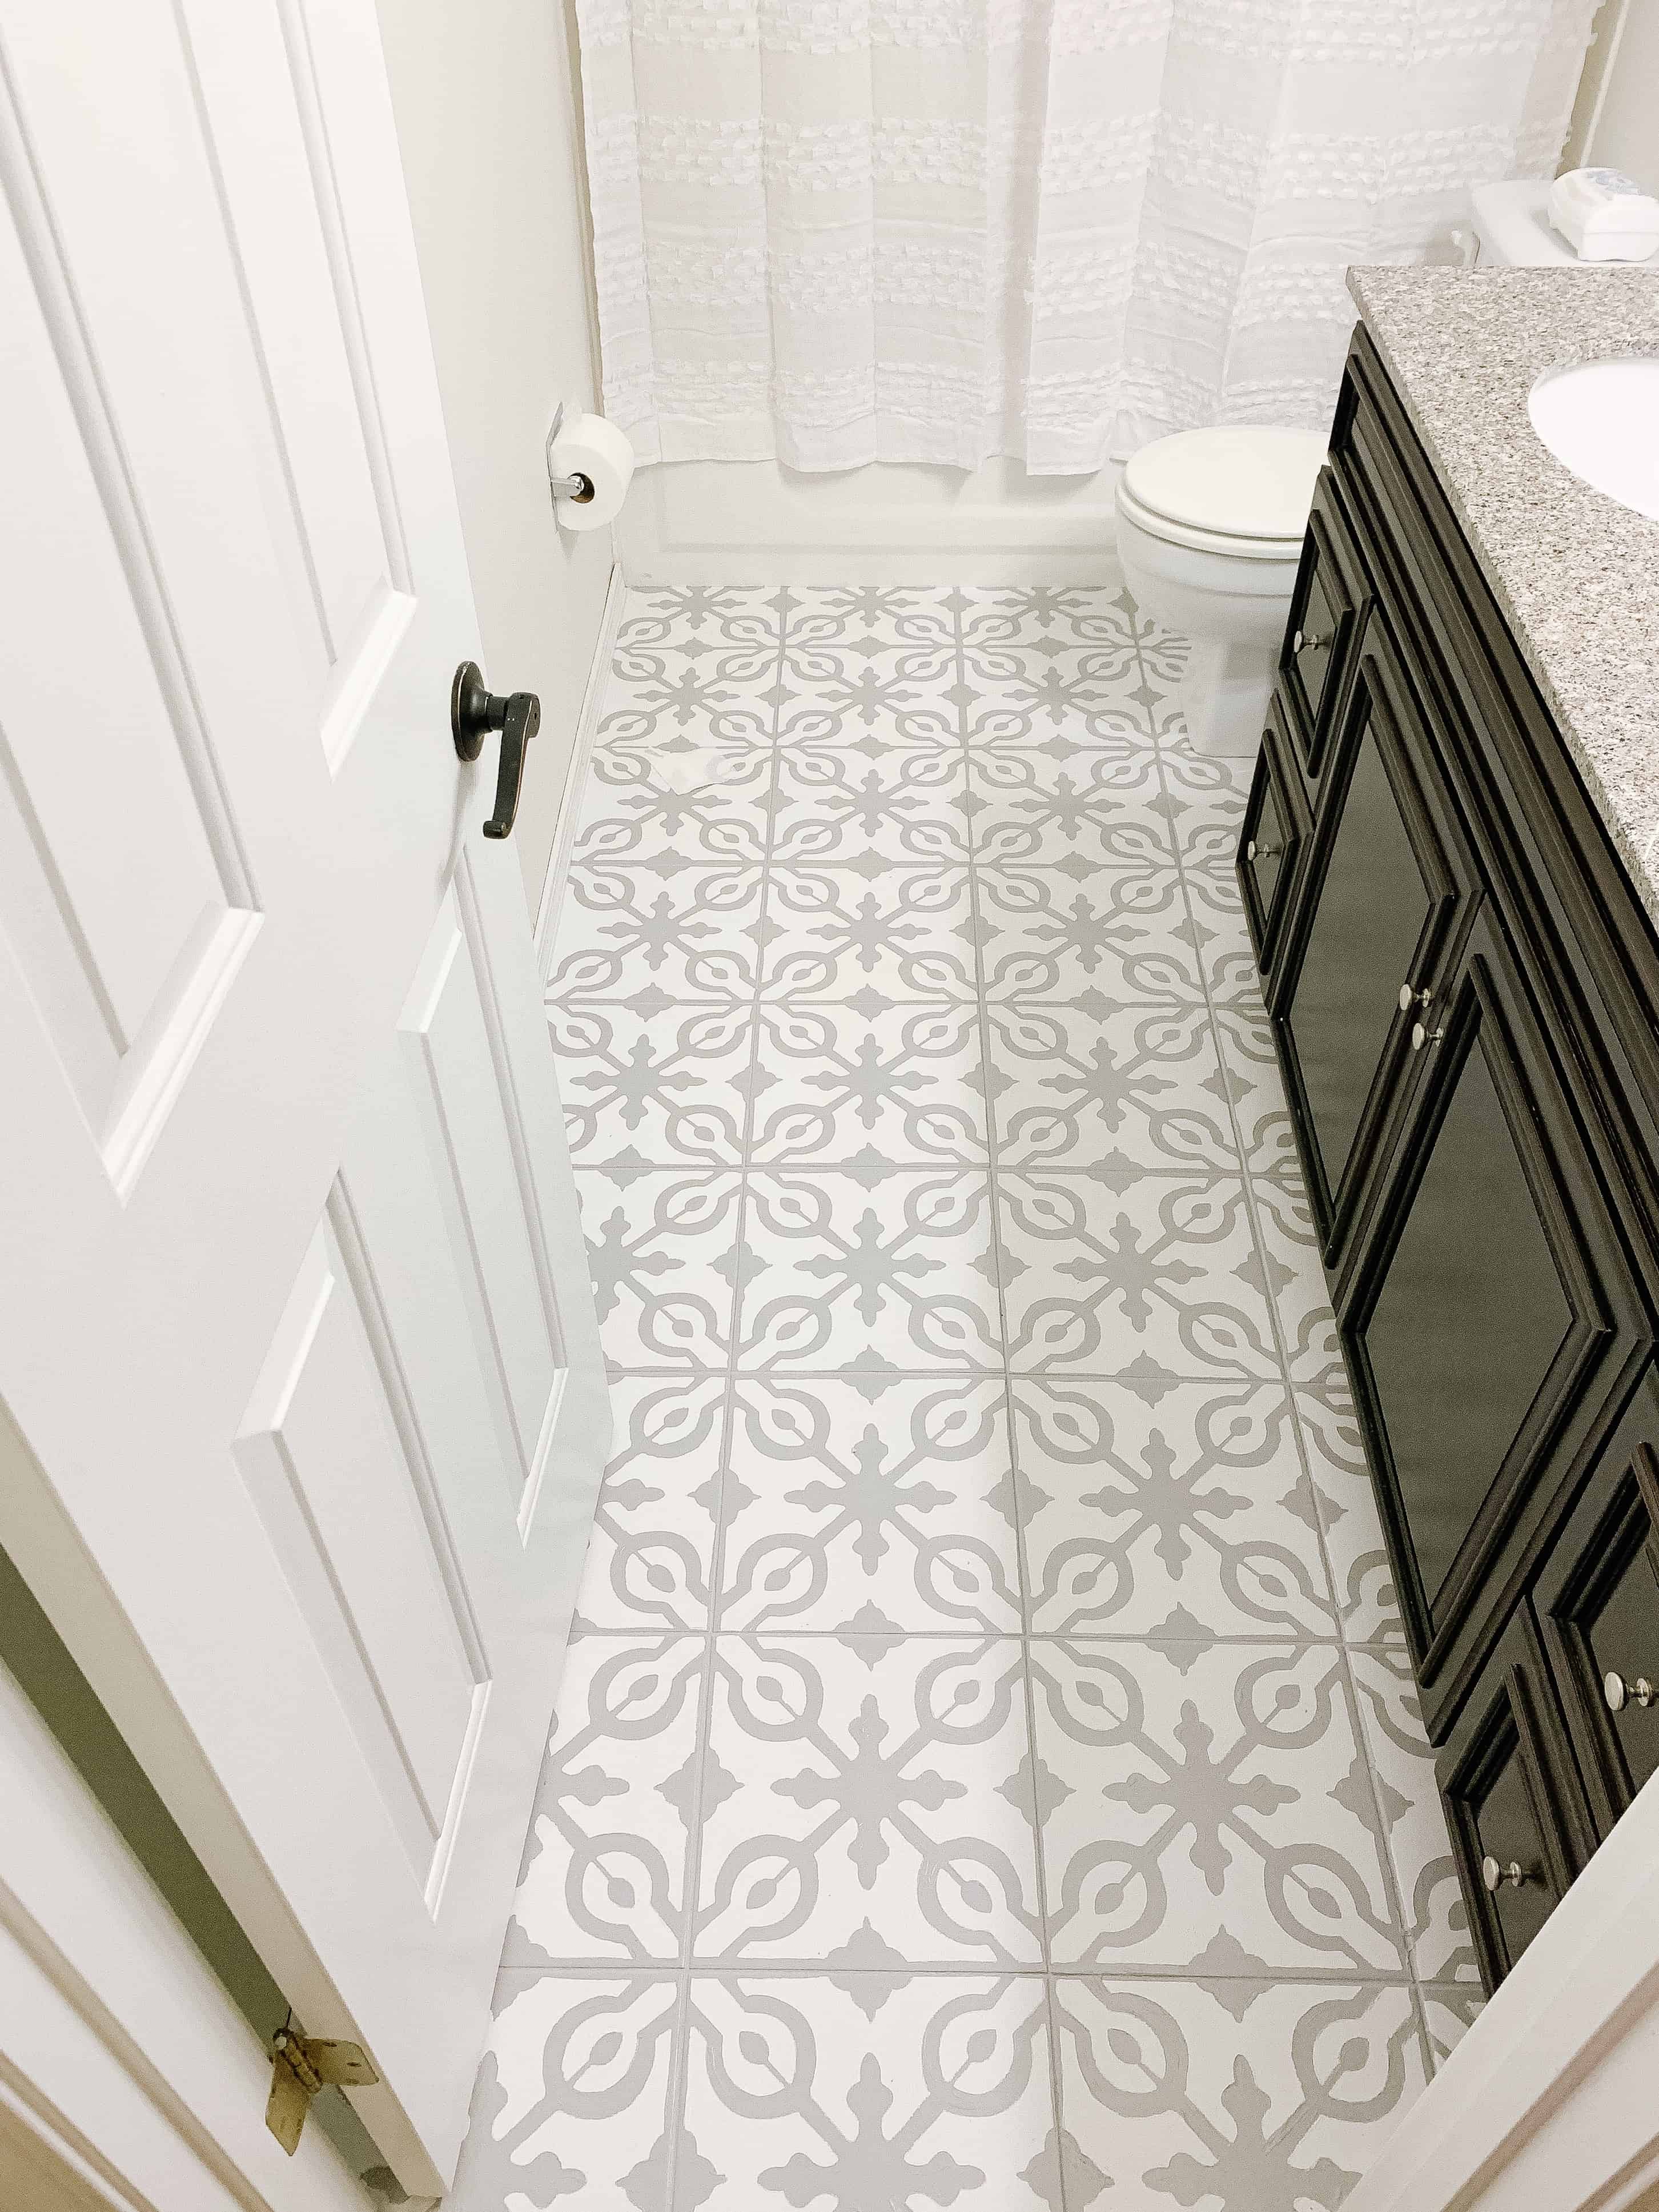 How To Paint Tile Floors, What Kind Of Paint To Use On Ceramic Tile Floor